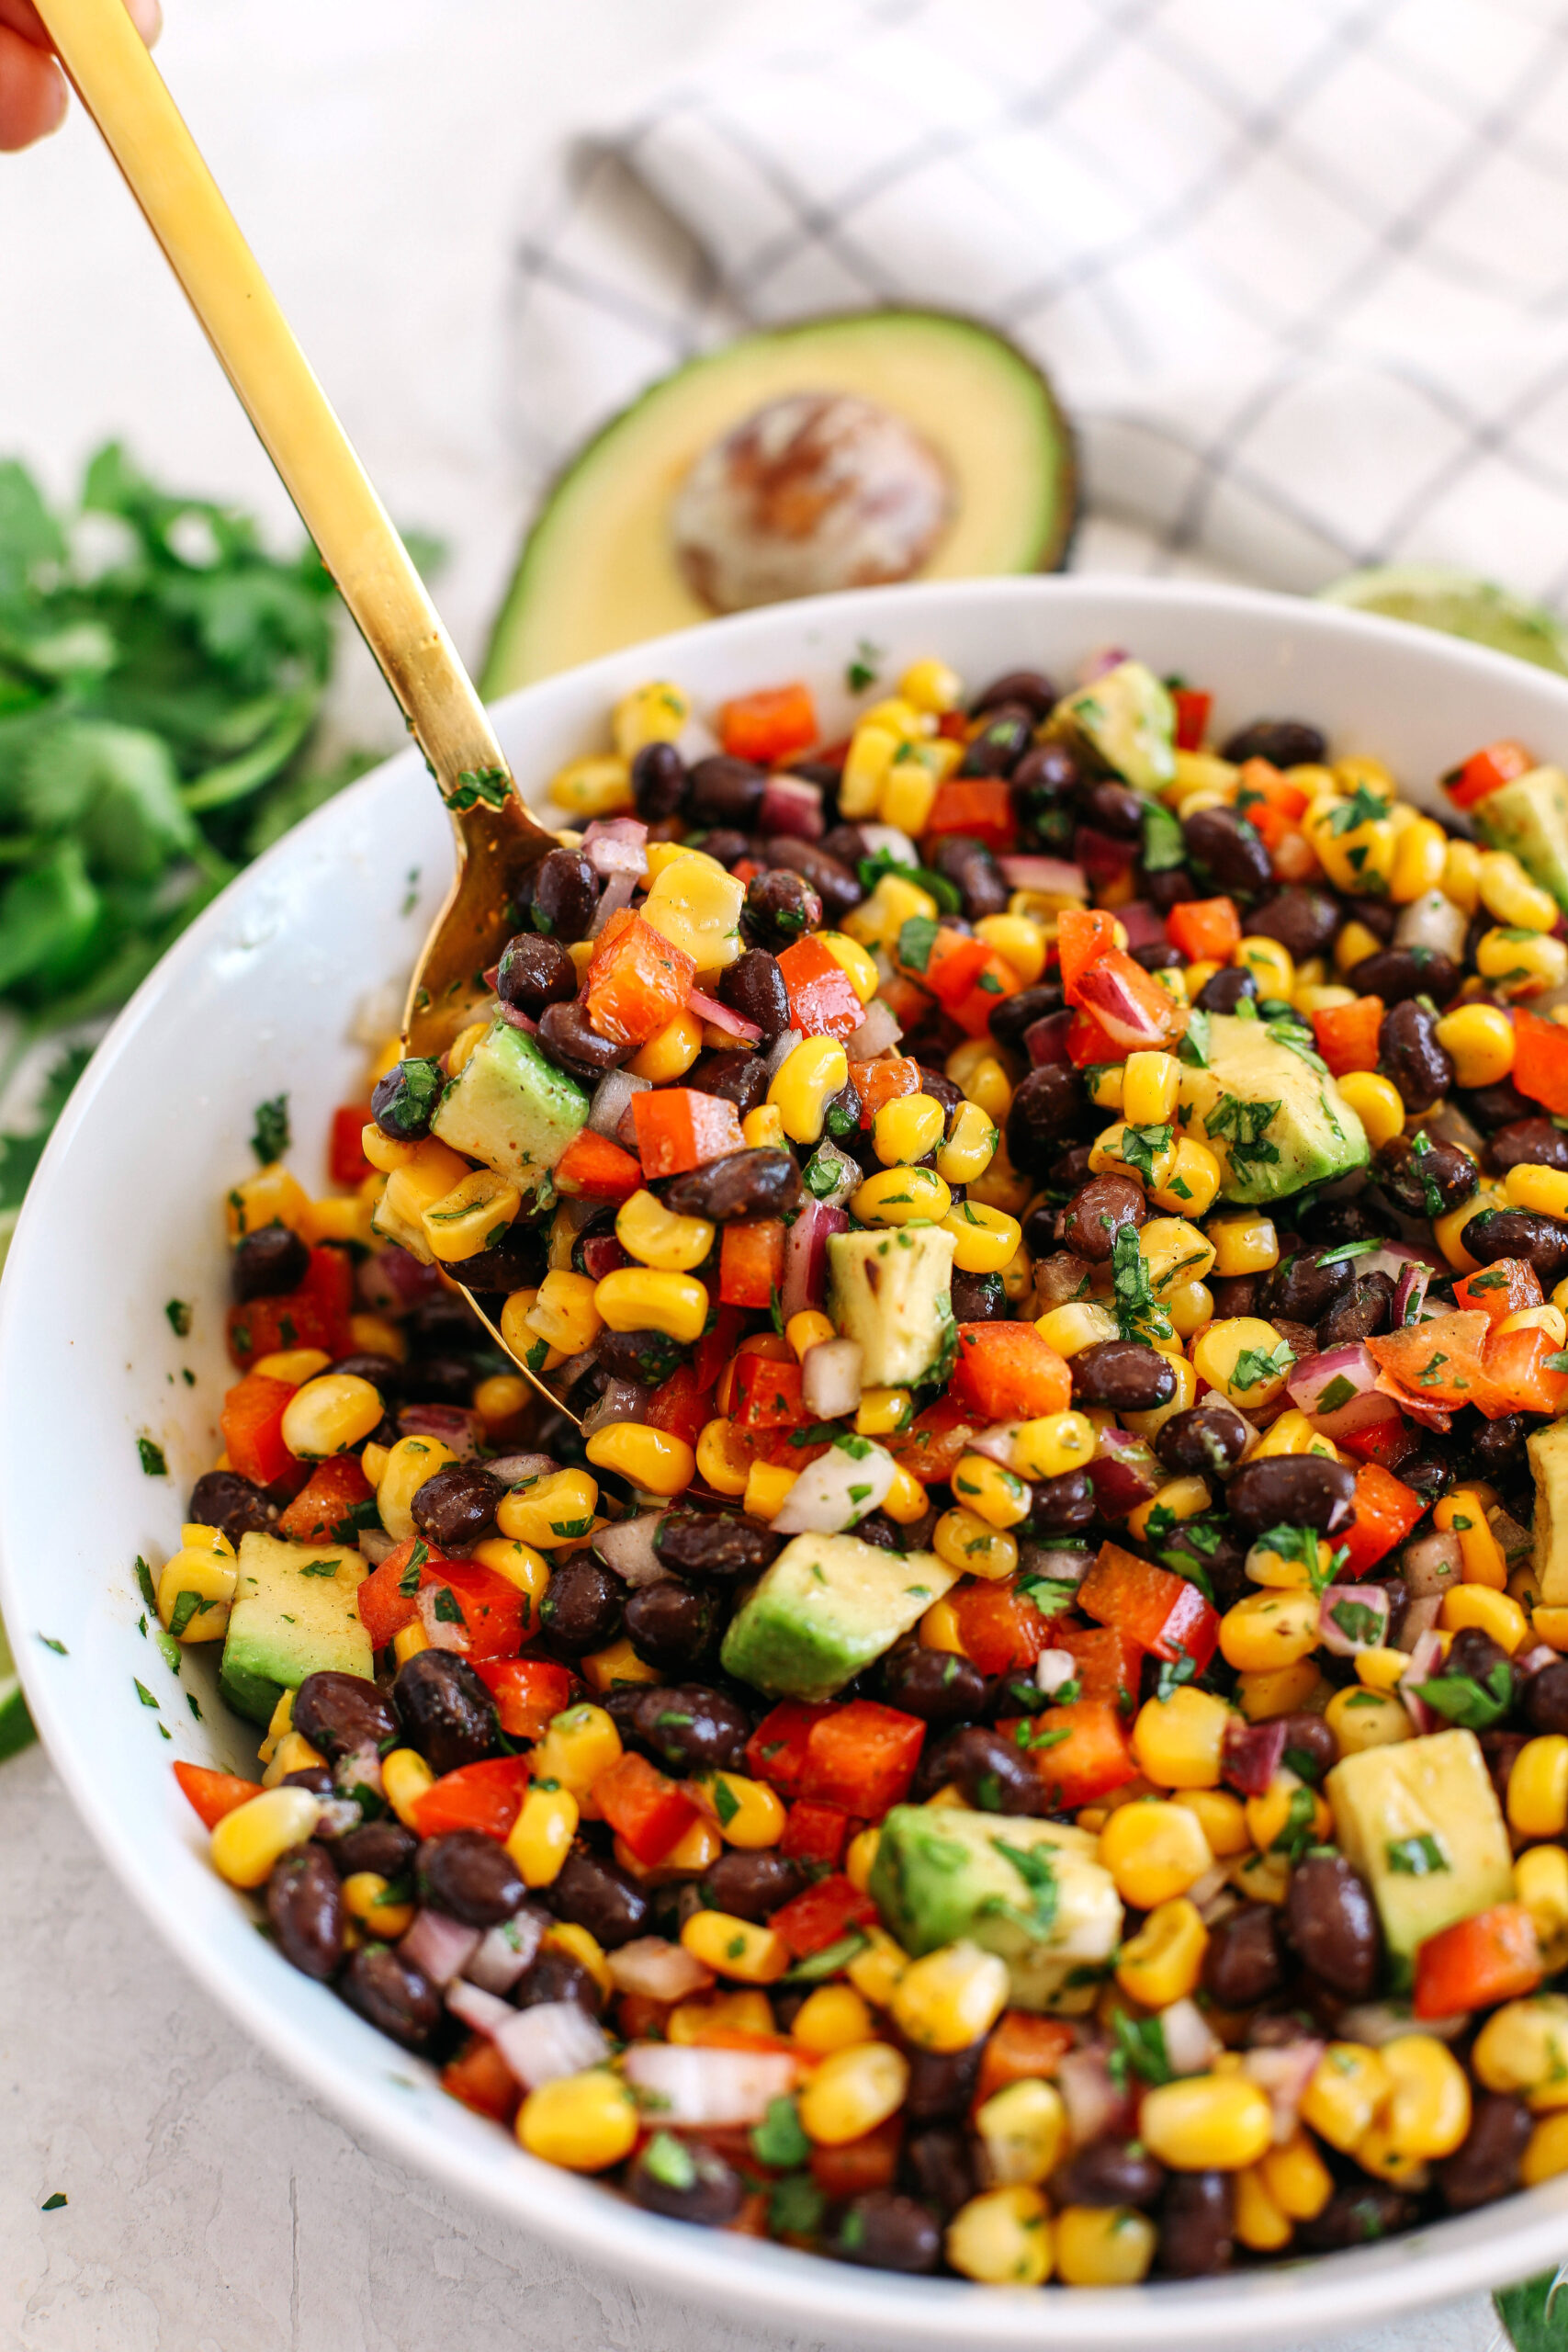 This Black Bean and Corn Salad is loaded with crisp veggies, delicious spices and fresh cilantro, all tossed together in a zesty lime dressing making it the perfect summer side dish or dip!